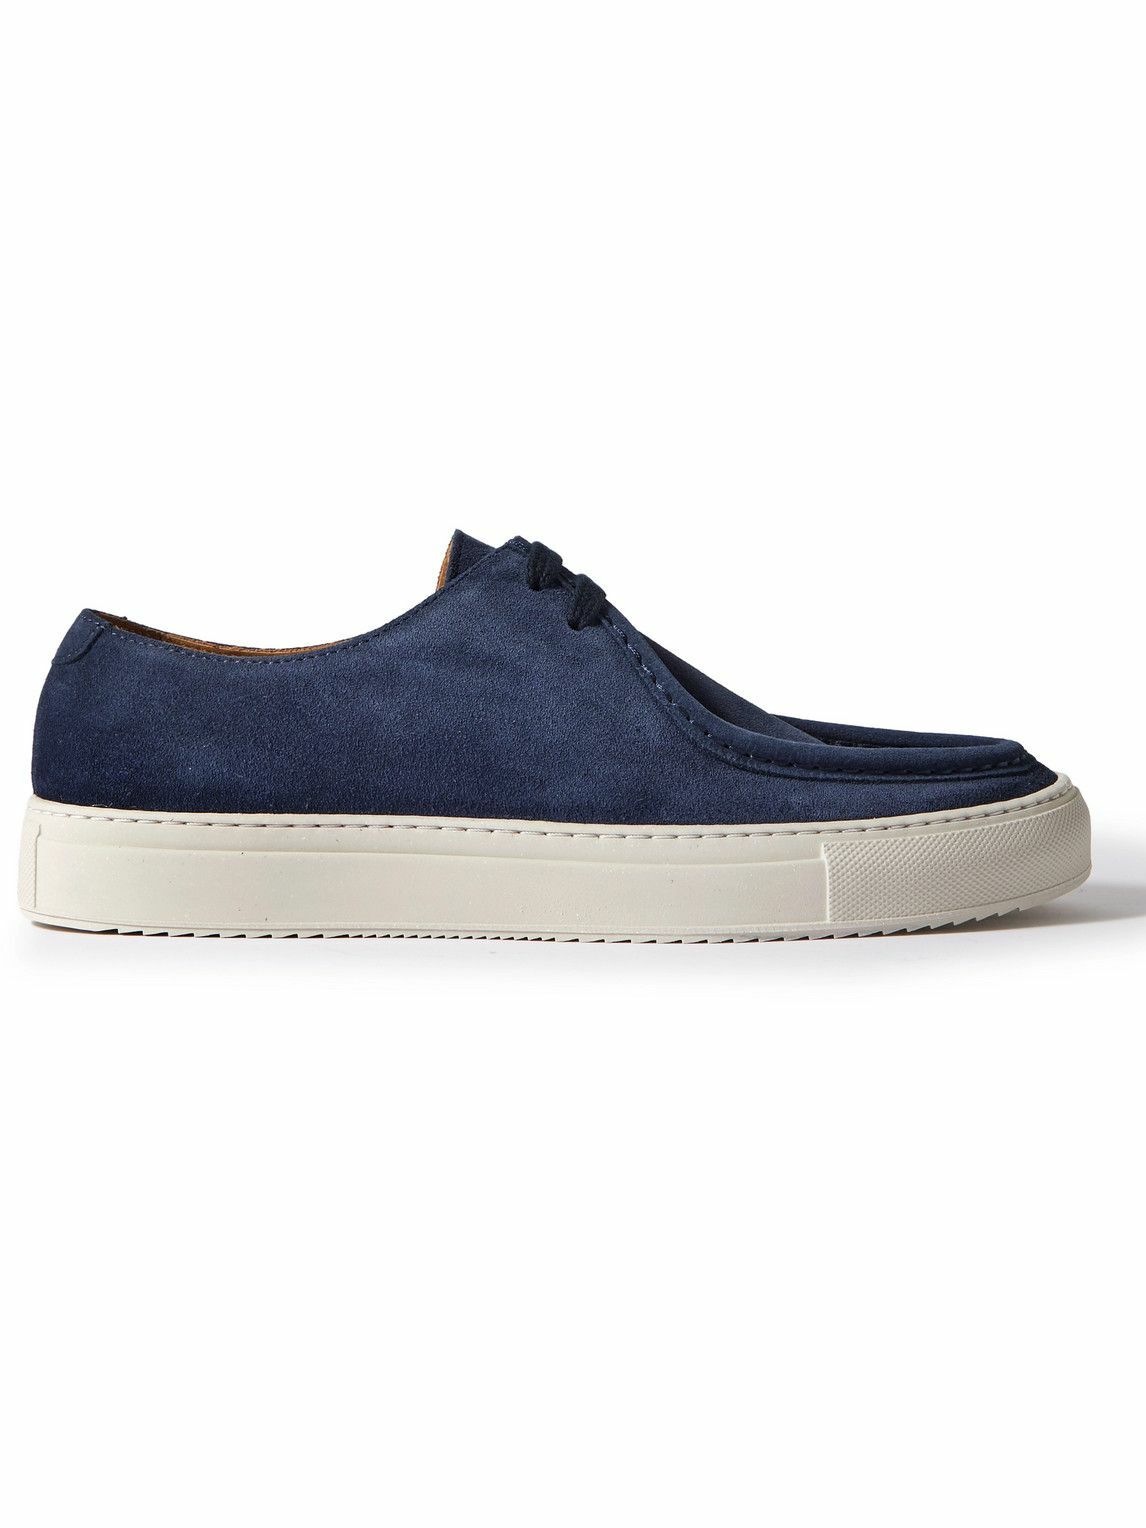 Mr P. - Larry Regenerated Suede by evolo® Derby Shoes - Blue Mr P.